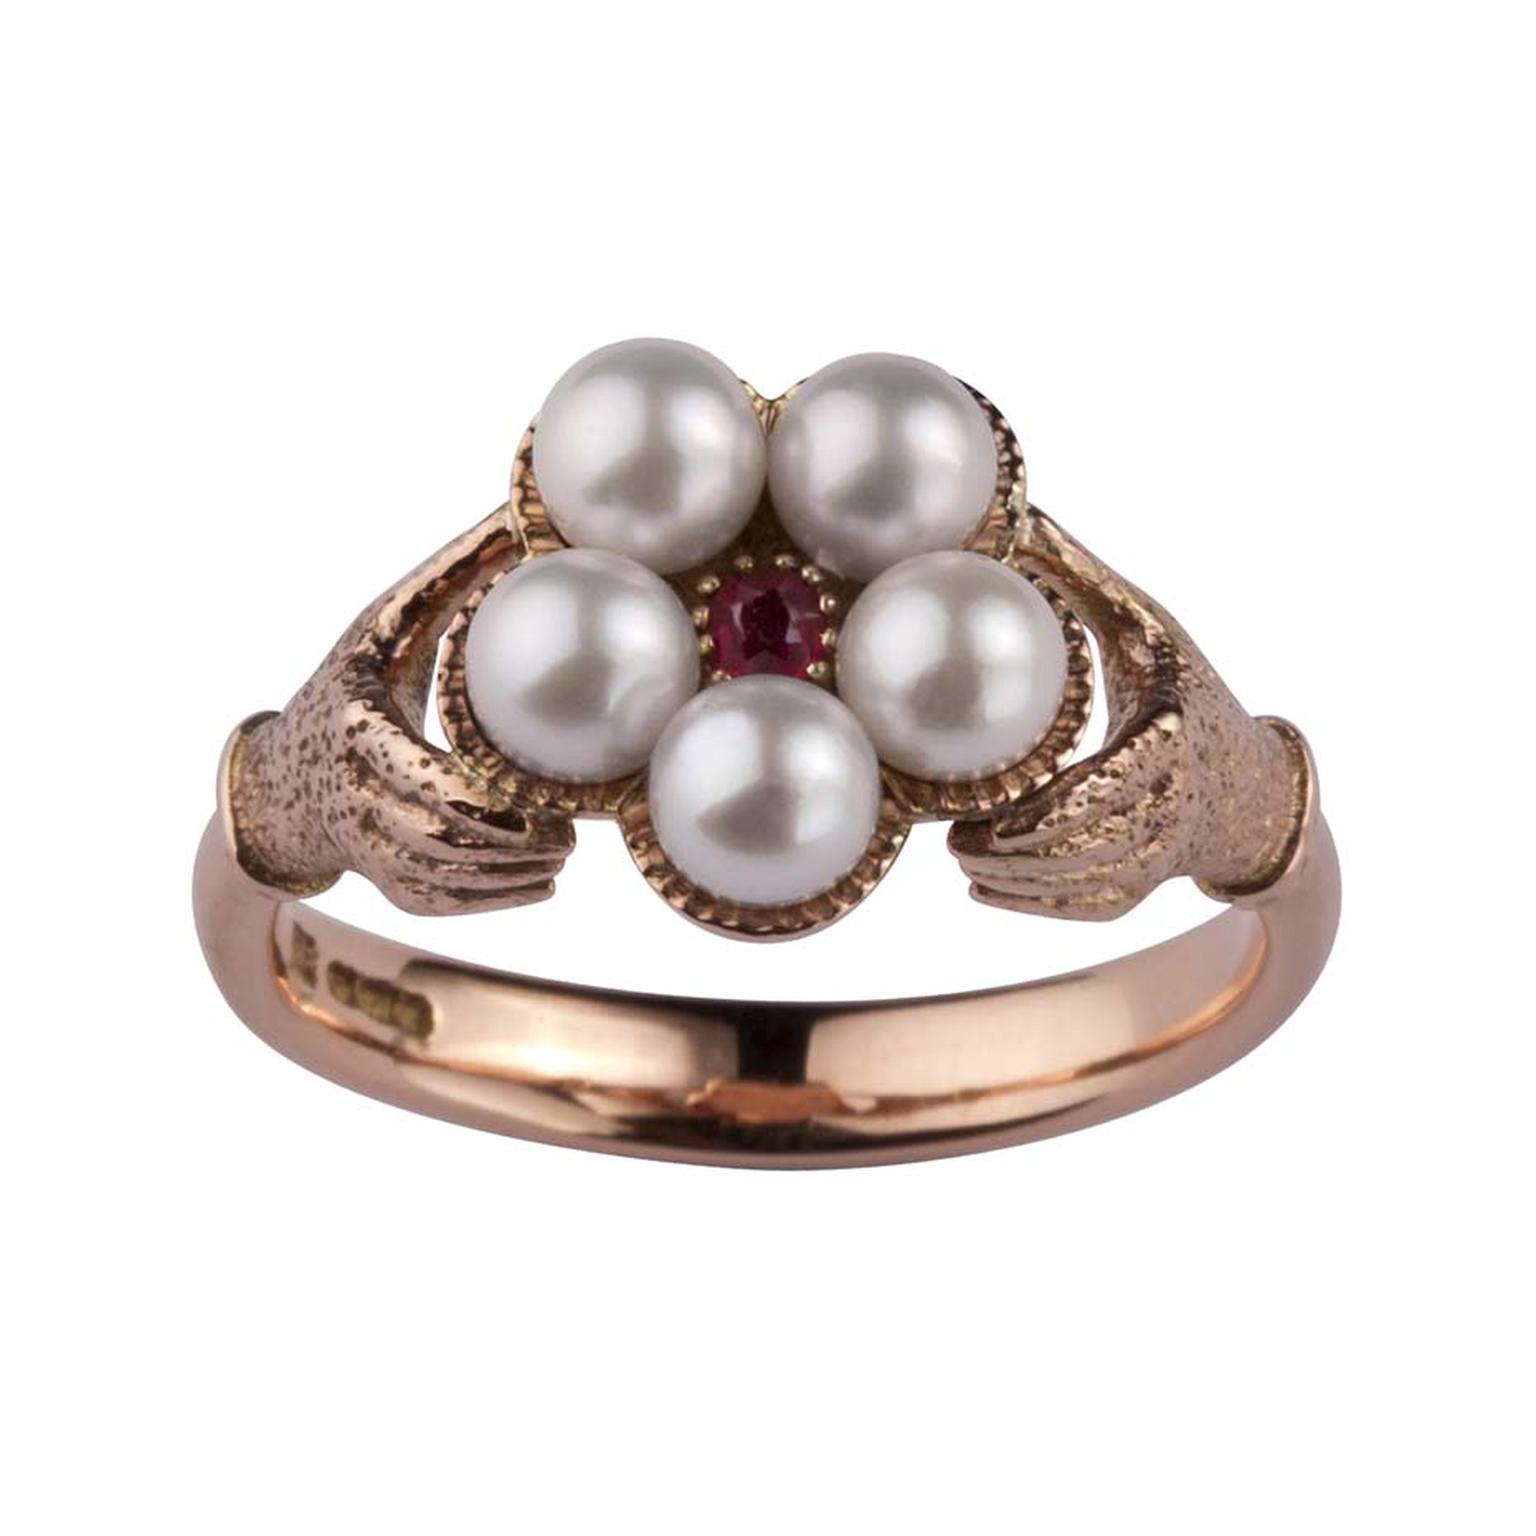 The bespoke rose gold, Akoya pearl and ruby ring made by Stephen Einhorn for Cate Blanchett to wear in Disney’s remake of Cinderella, released this weekend in the OK. Blanchett plays the wicked stepmother.